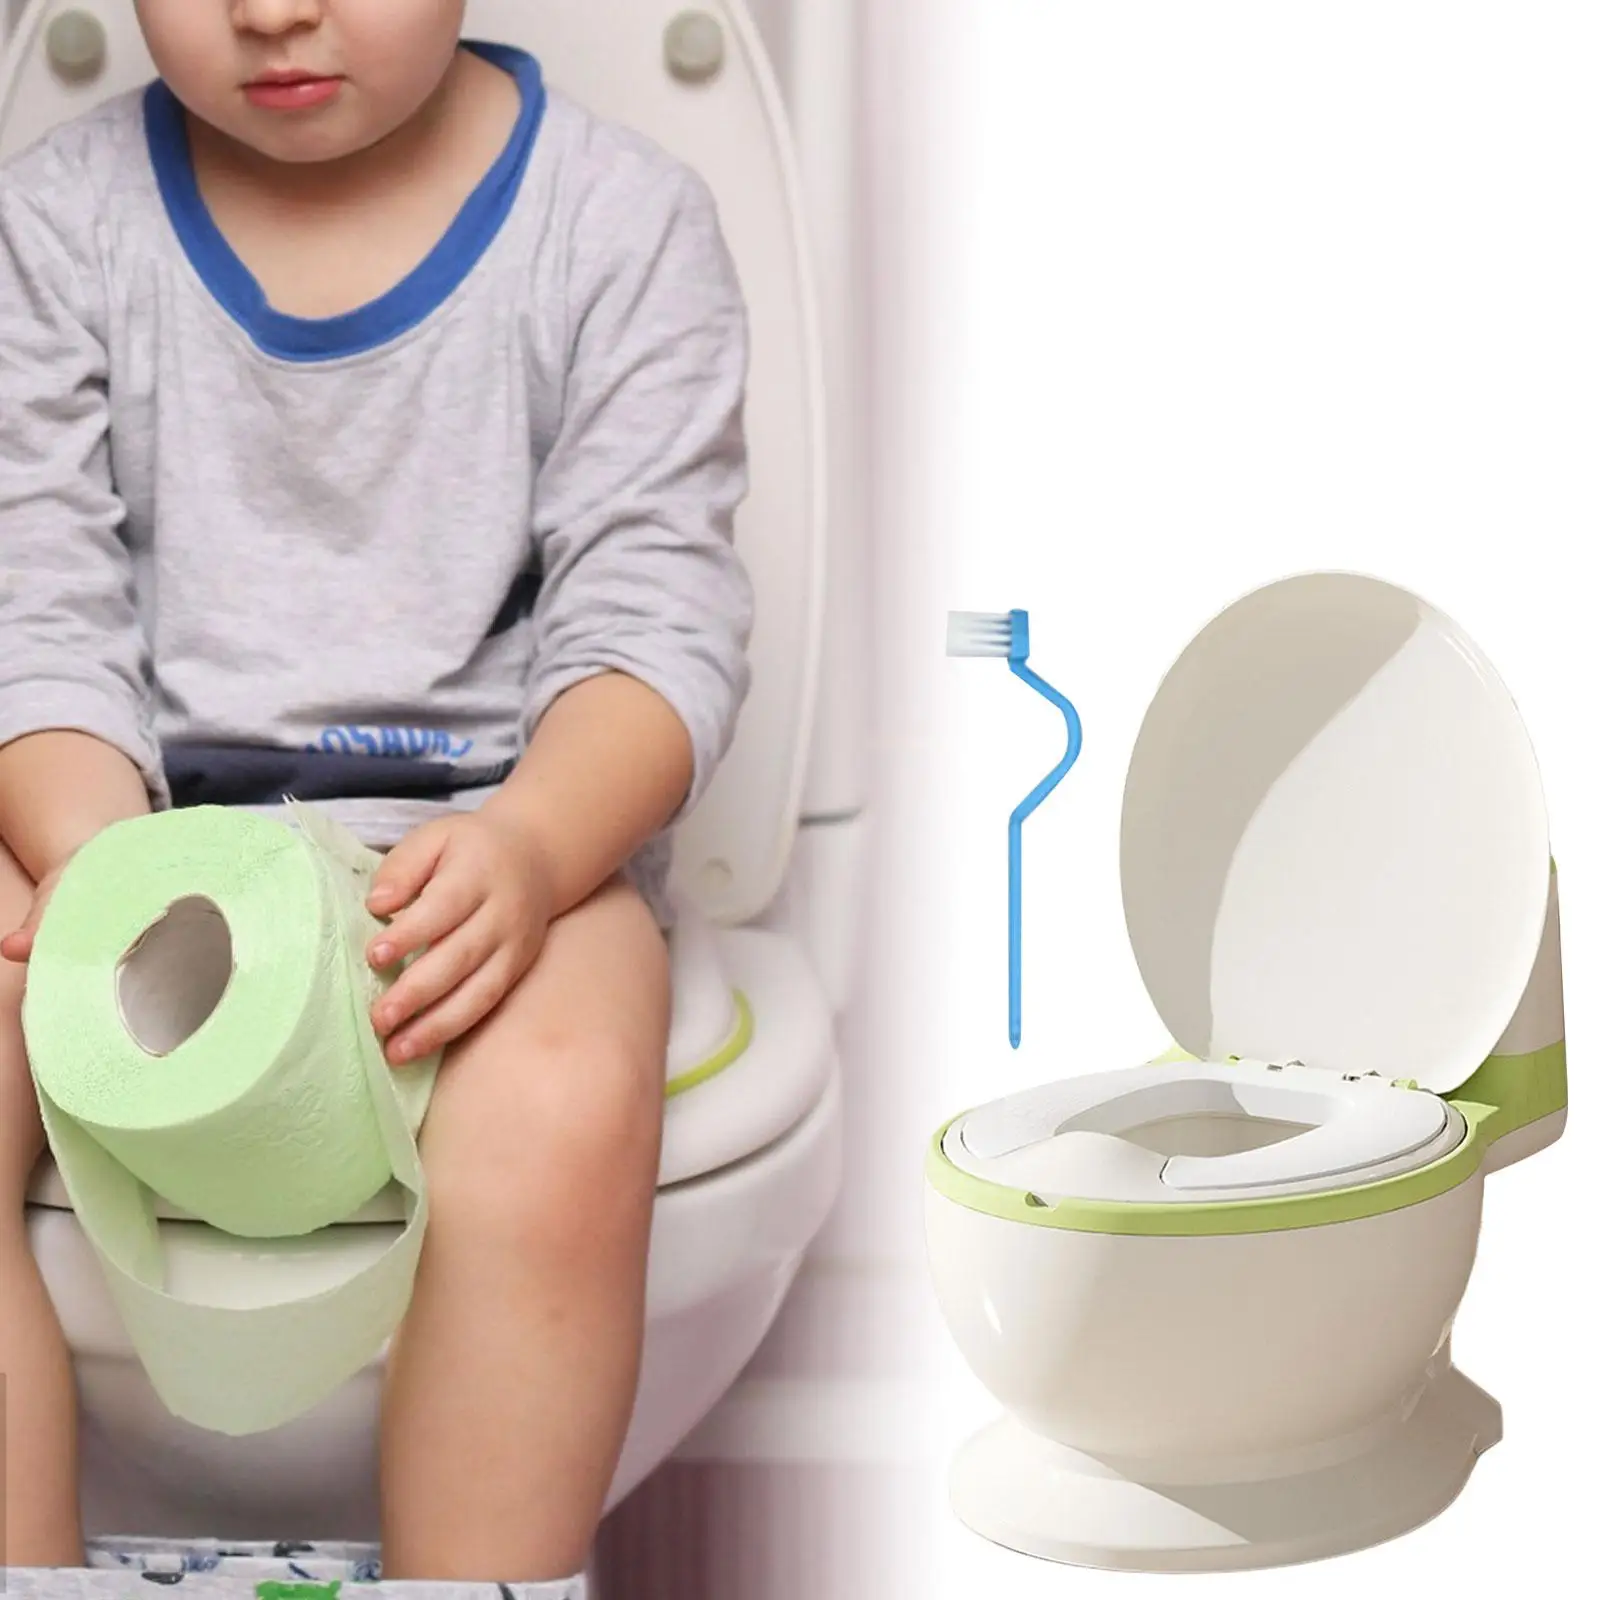 Toilet Training Potty Non Slip Lifelike Flush Button Includes Cleaning Brush Training Transition Potty Seat for Bedroom Ages 0-7